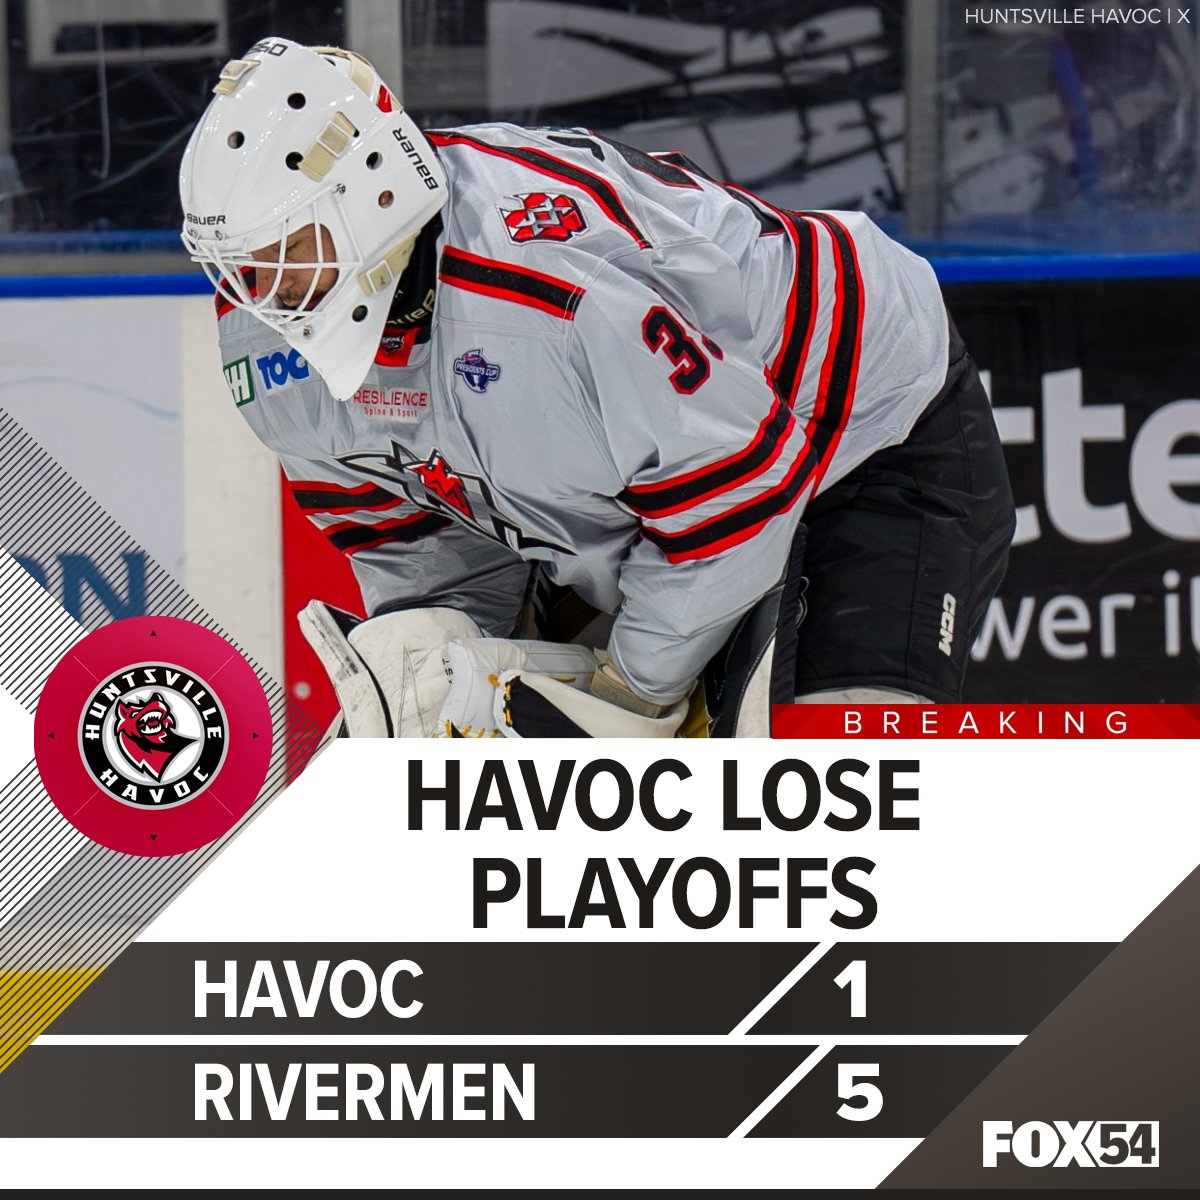 JUST IN: Havoc's cup chances slip through with a 1-5 final against Peoria. #SPHL